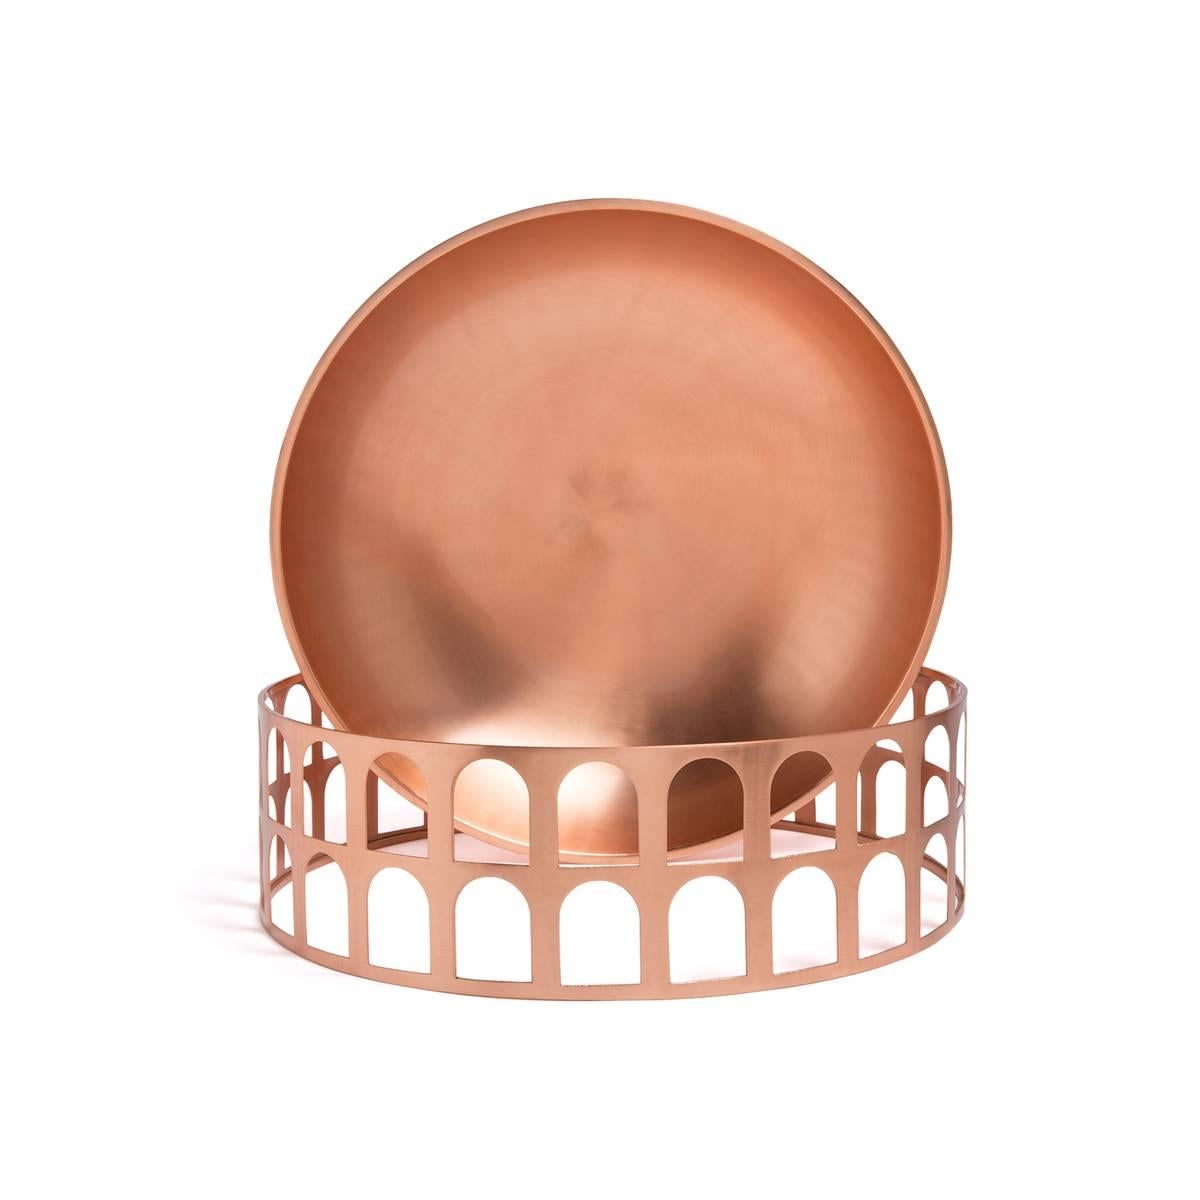 Colosseum I is a copper centerpiece (or fruit bowl). 
The product is part of the collection New Roman, by Jaime Hayon, a series of containers which reference the shapes of ancient carafes, plates and the large storage vessels amphorae. Inspired by